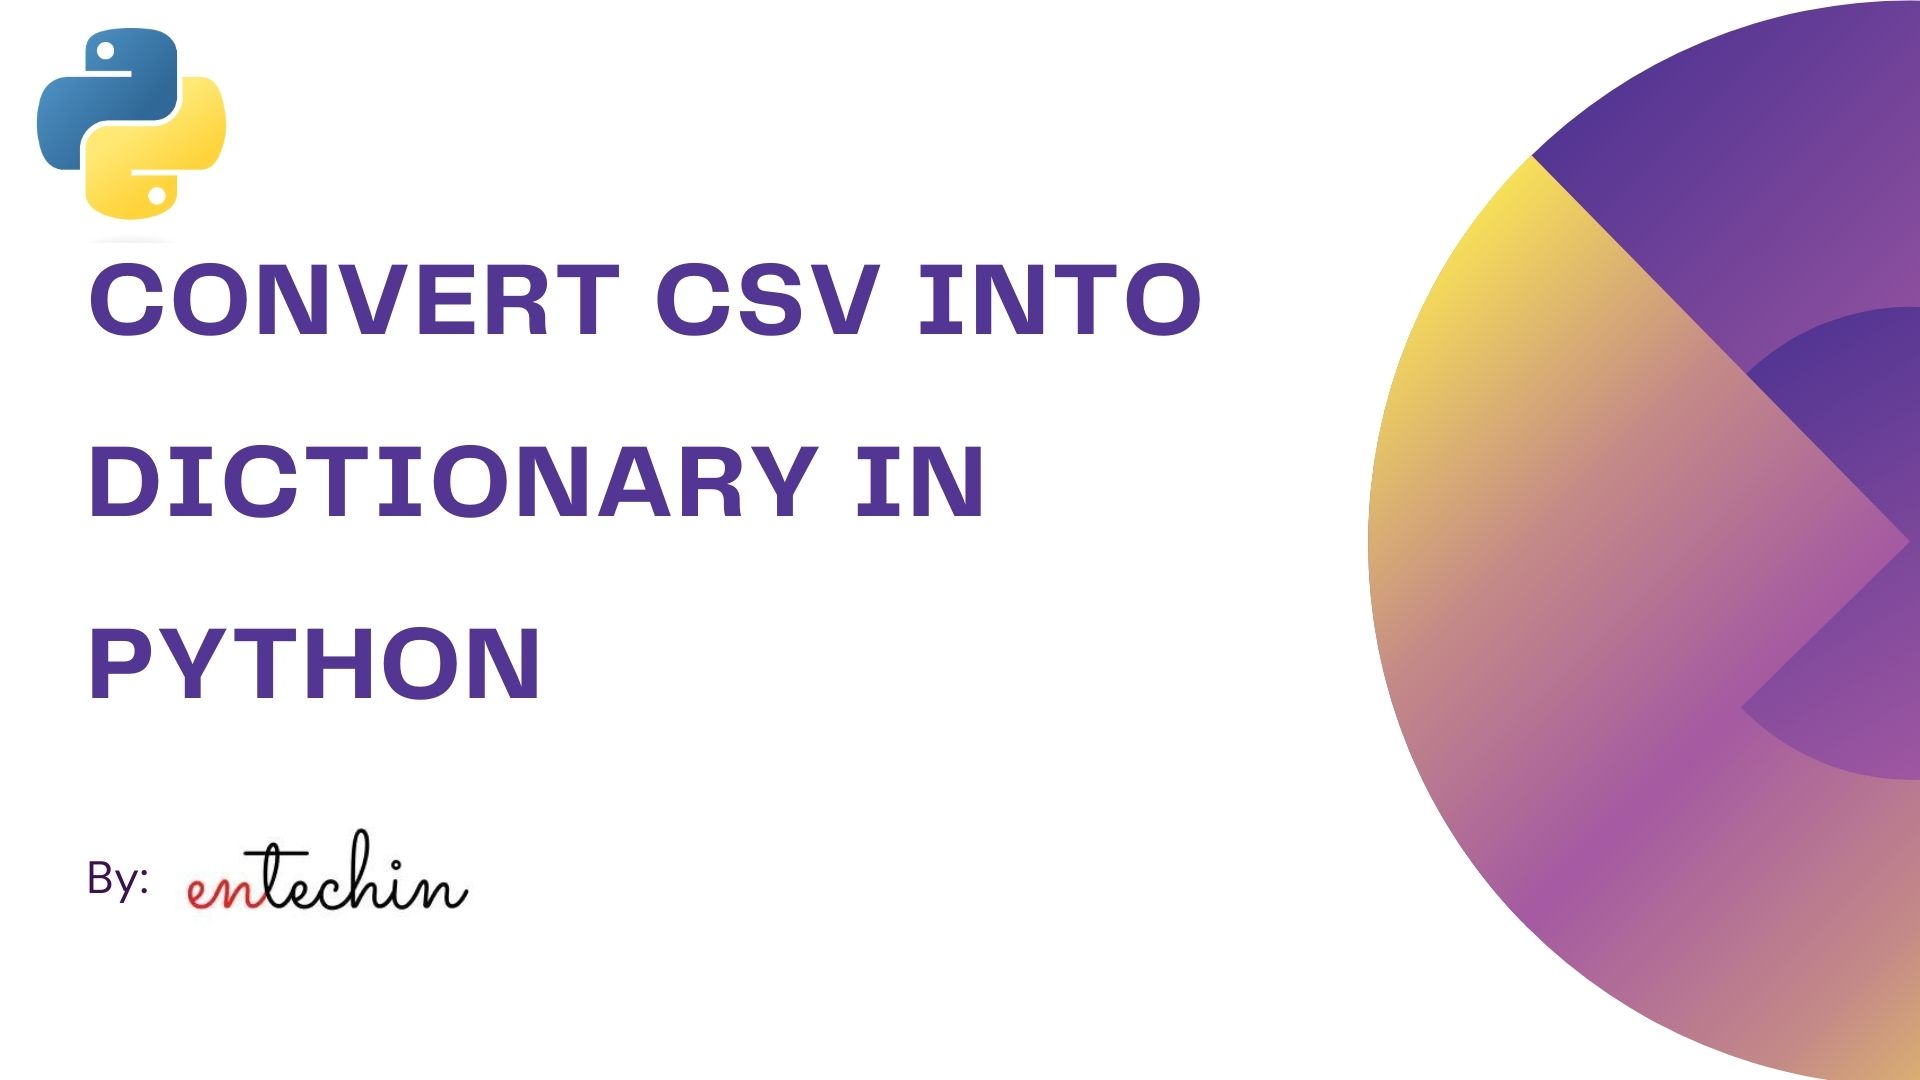 Convert CSV Into Dictionary in Python